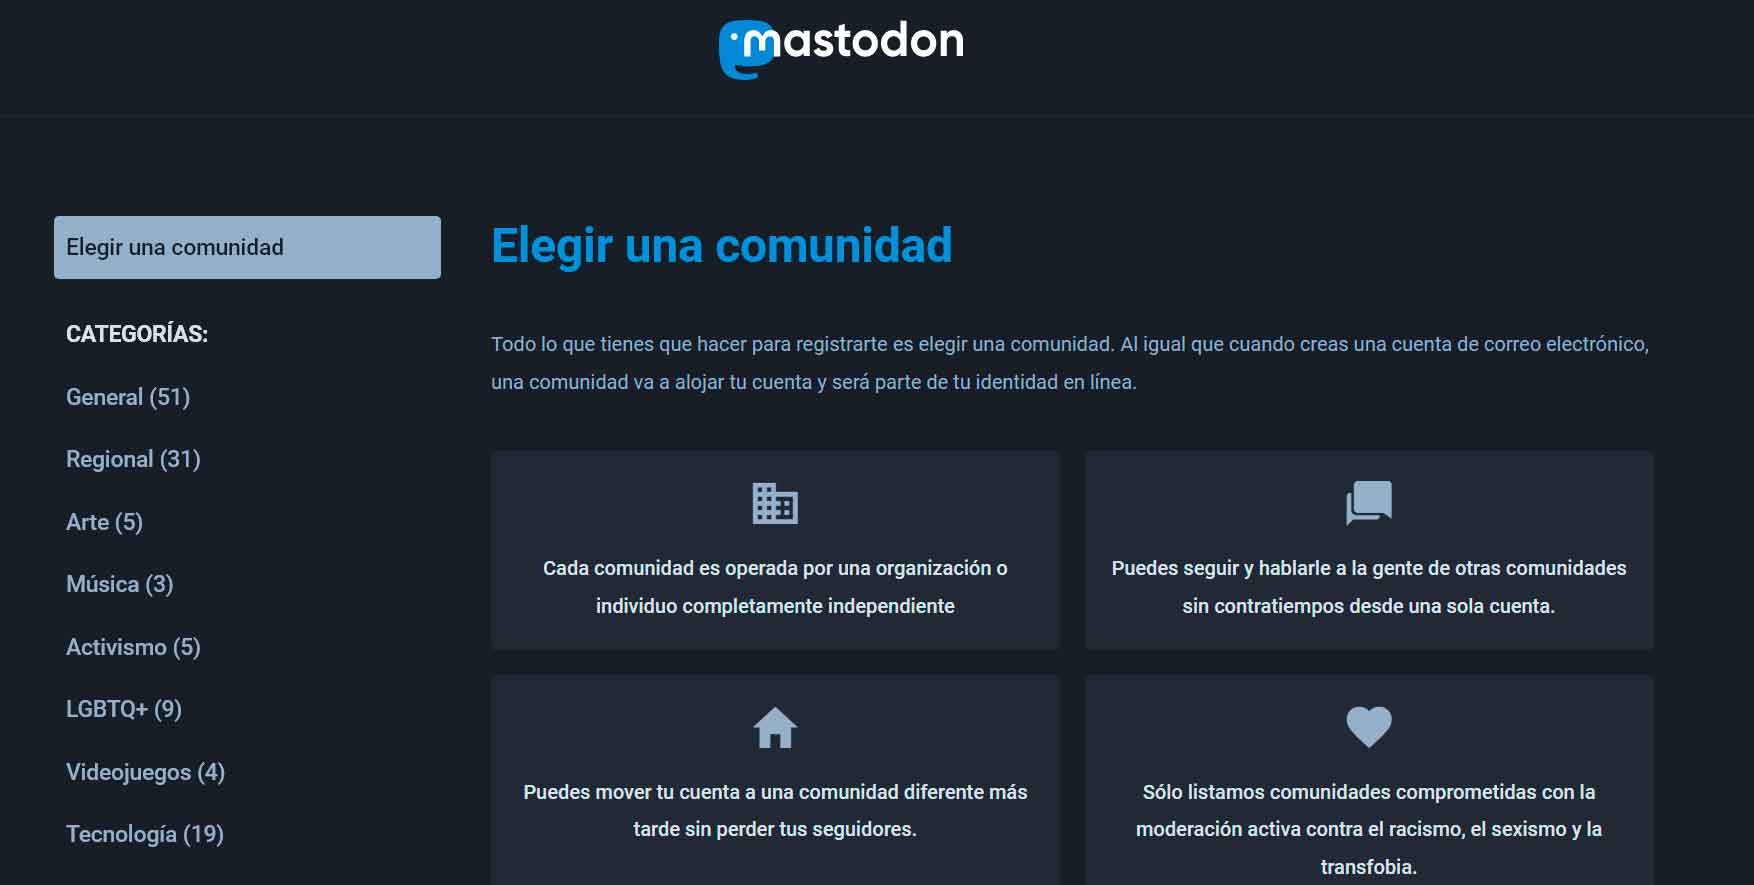 Tired of Twitter?  Why don't you try Mastodon?